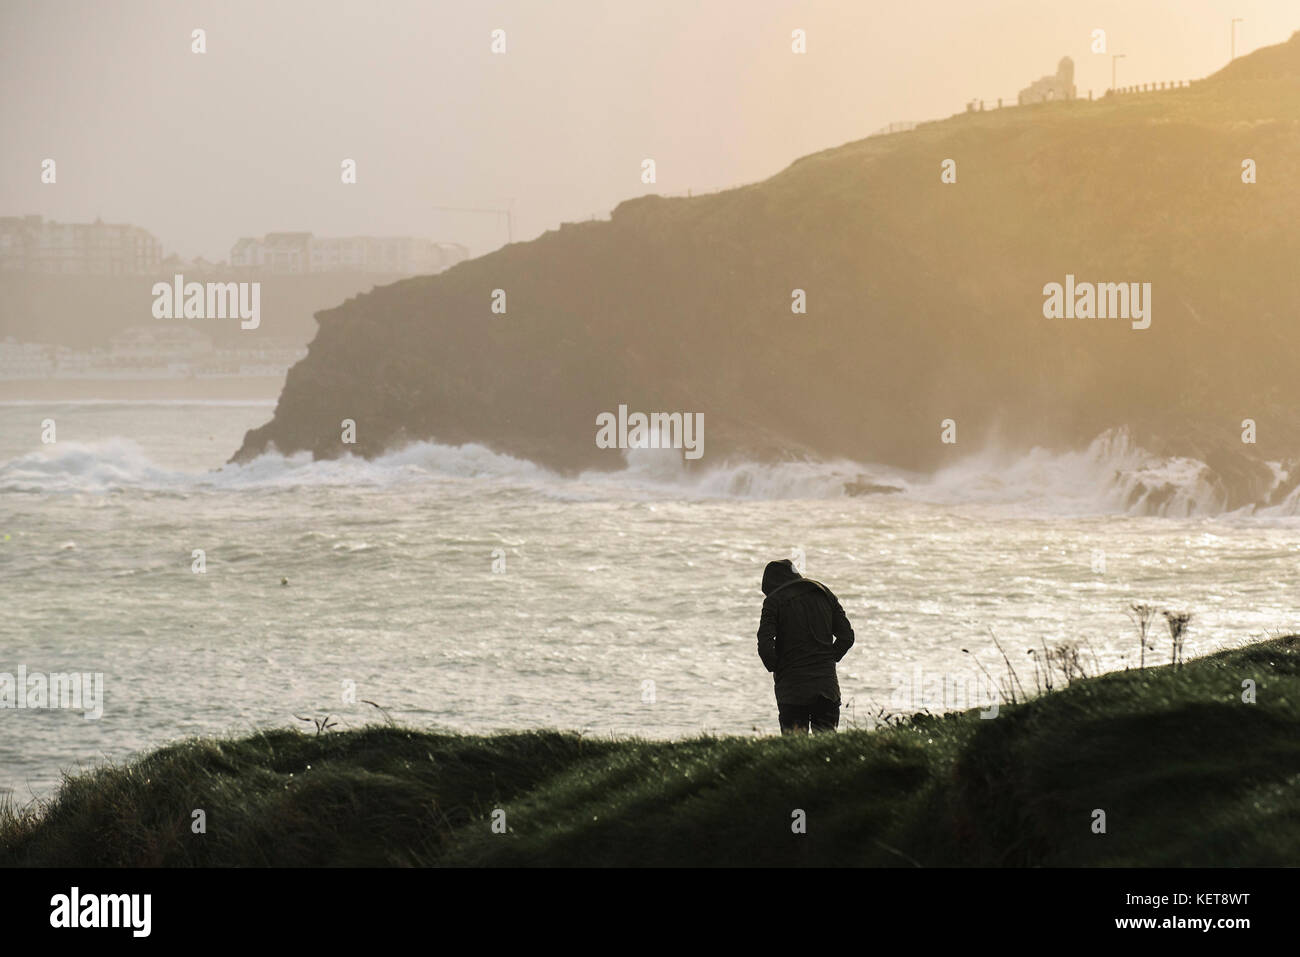 UK Weather - the silhouette of a person standing on the coast during rough weather. Stock Photo